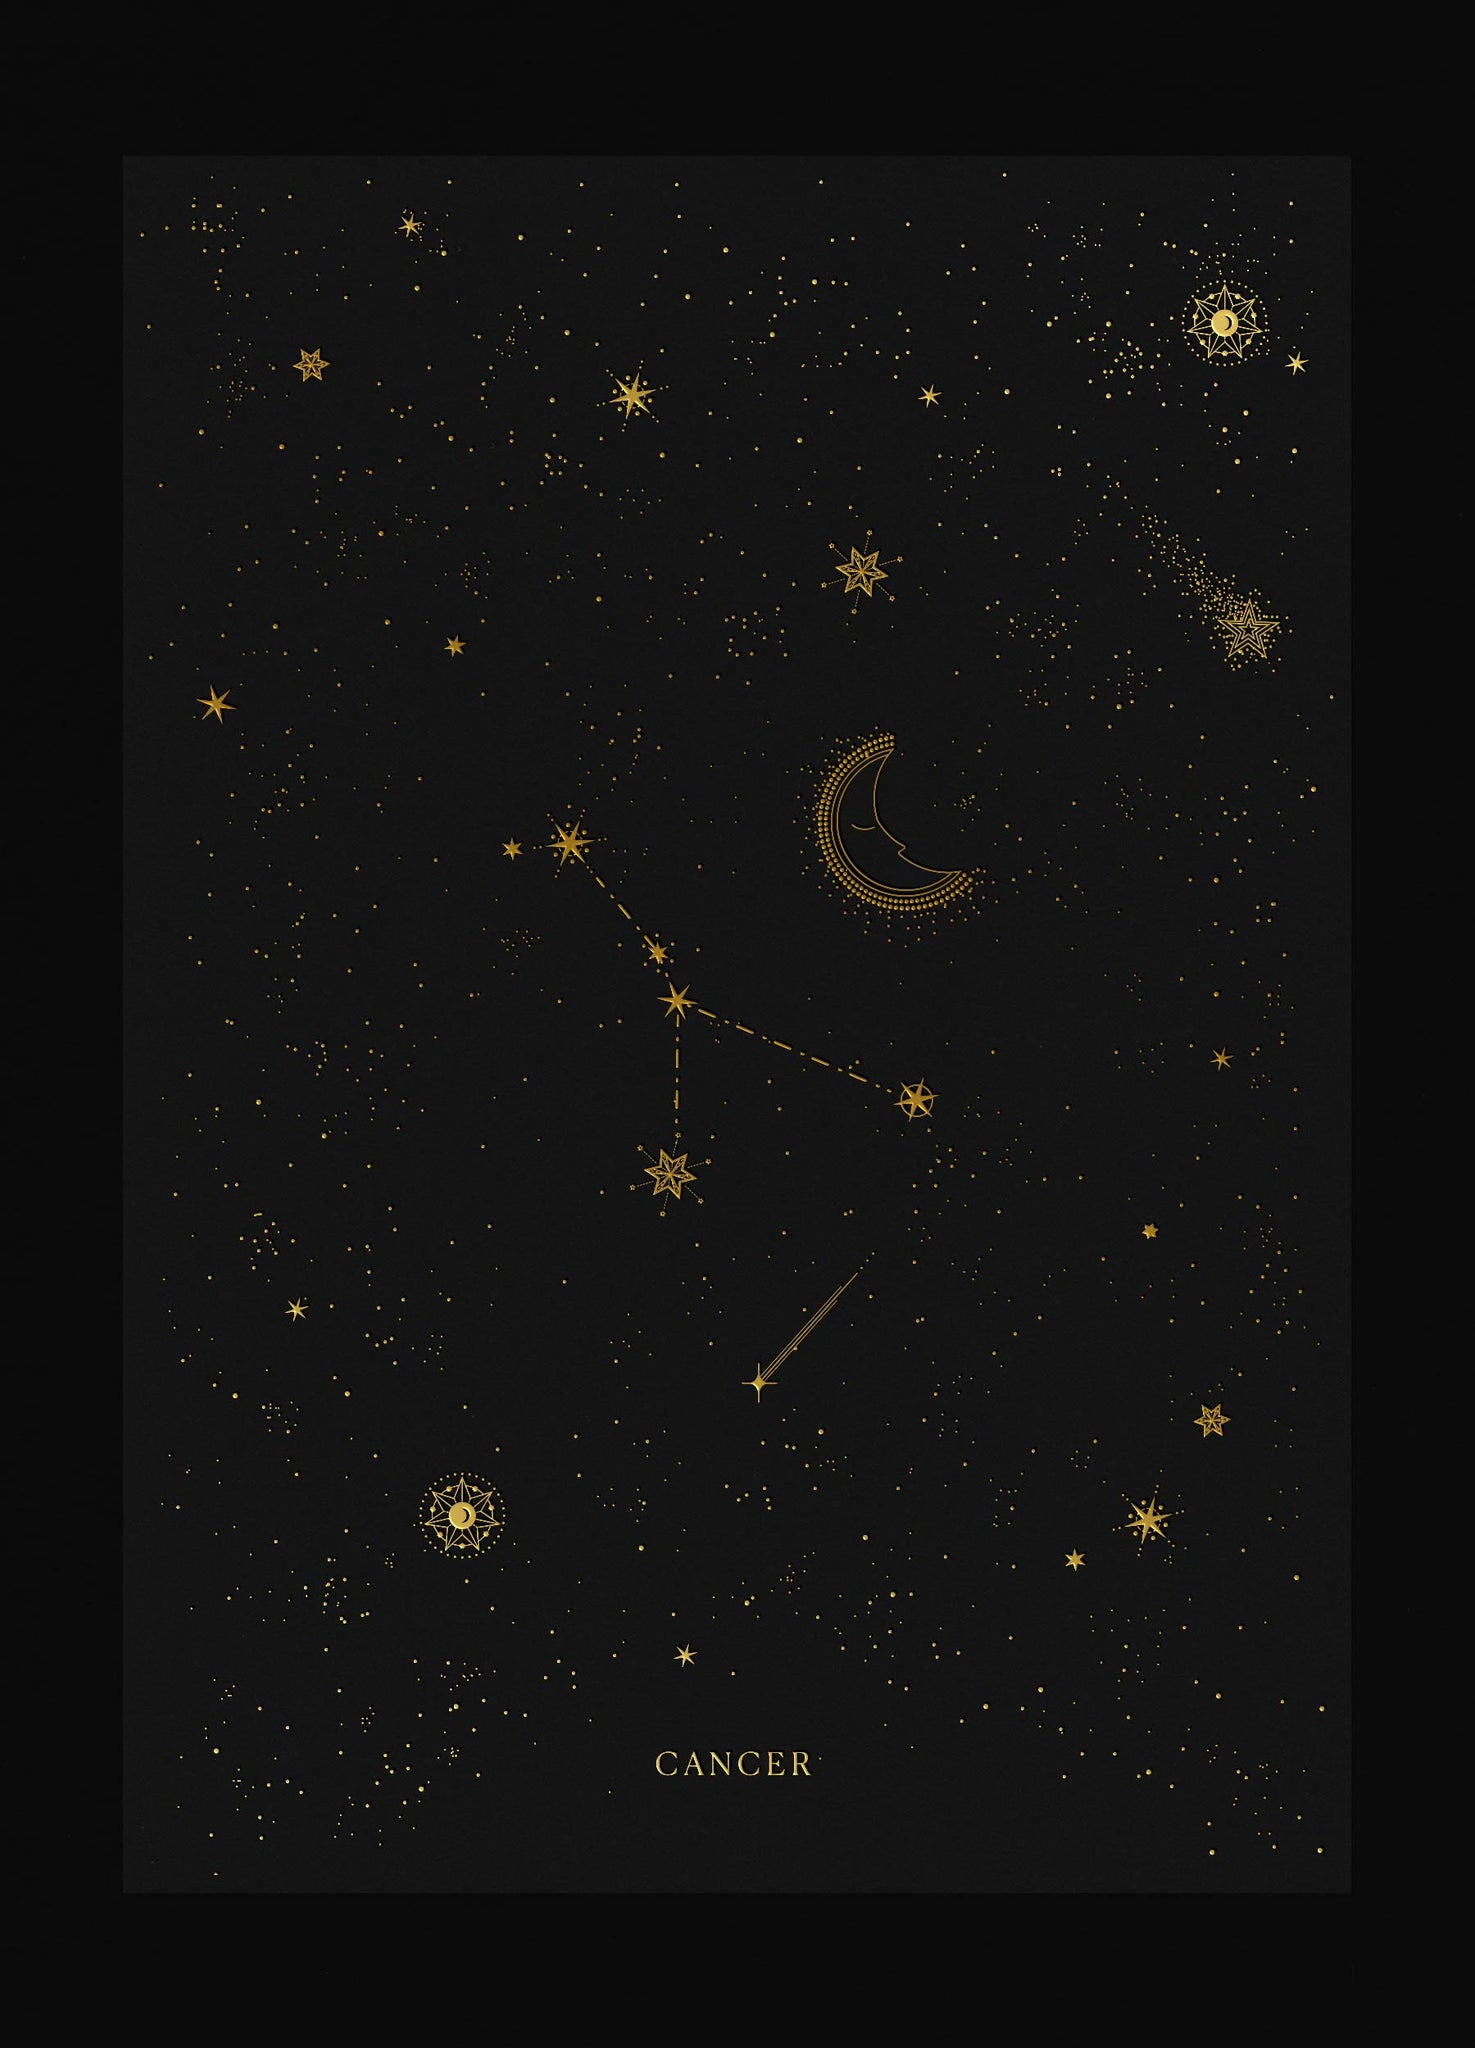 Cancer zodiac constellation gold metallic foil print on black paper by Cocorrina